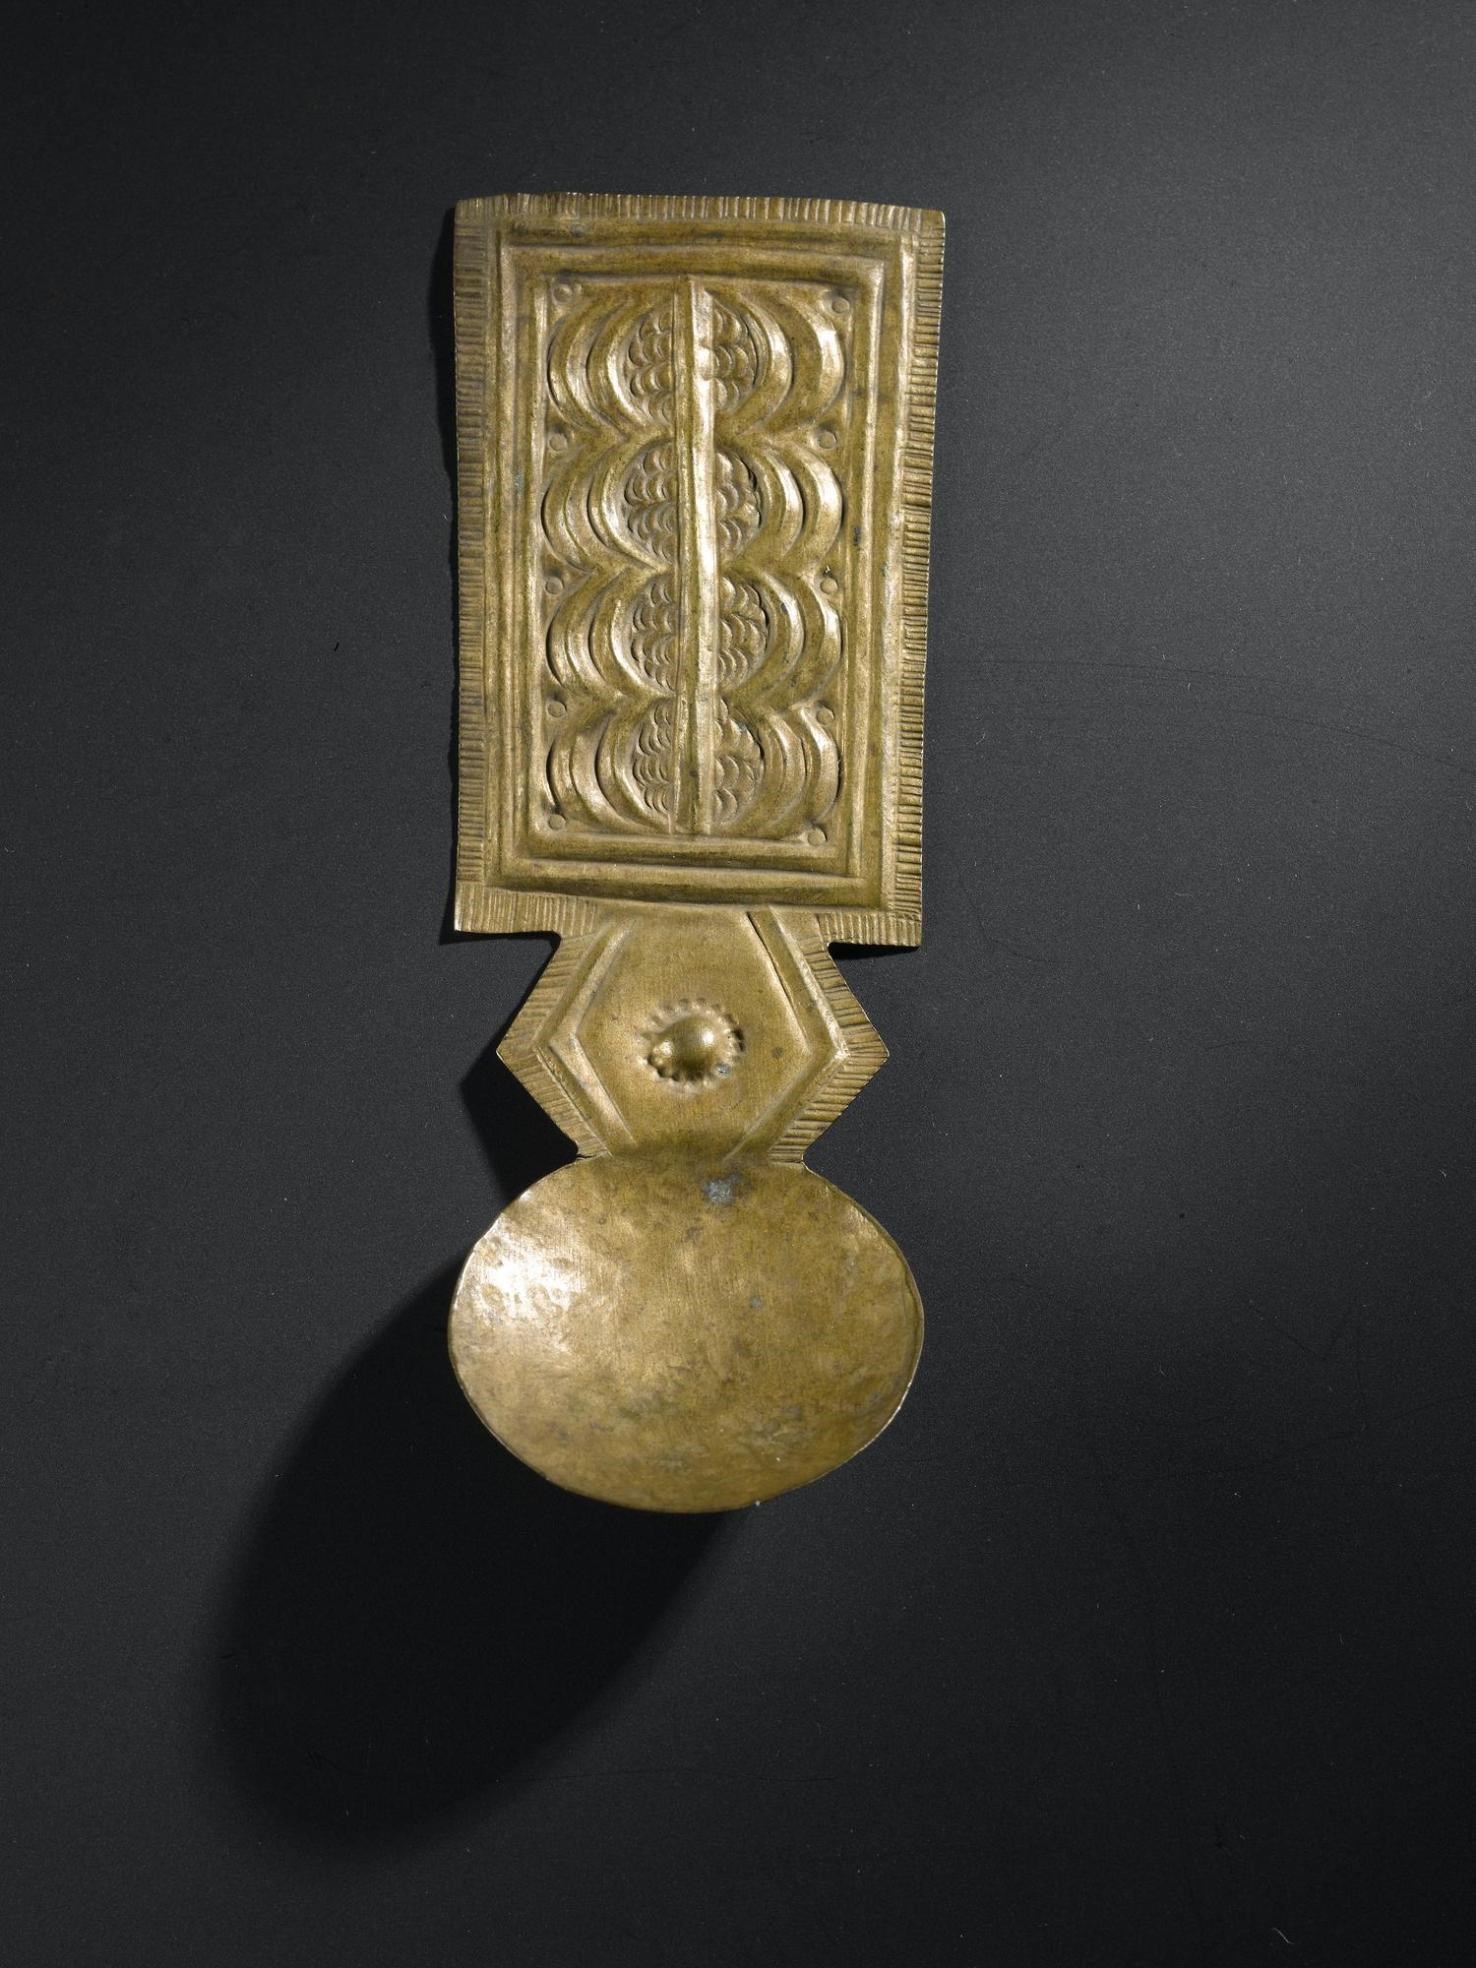 Spoon of beaten brass sheet with shallow circular bowl and flat rectangular handle ornamented with repoussé work: West Africa, Ghana, Asante, late 19th to early 20th century